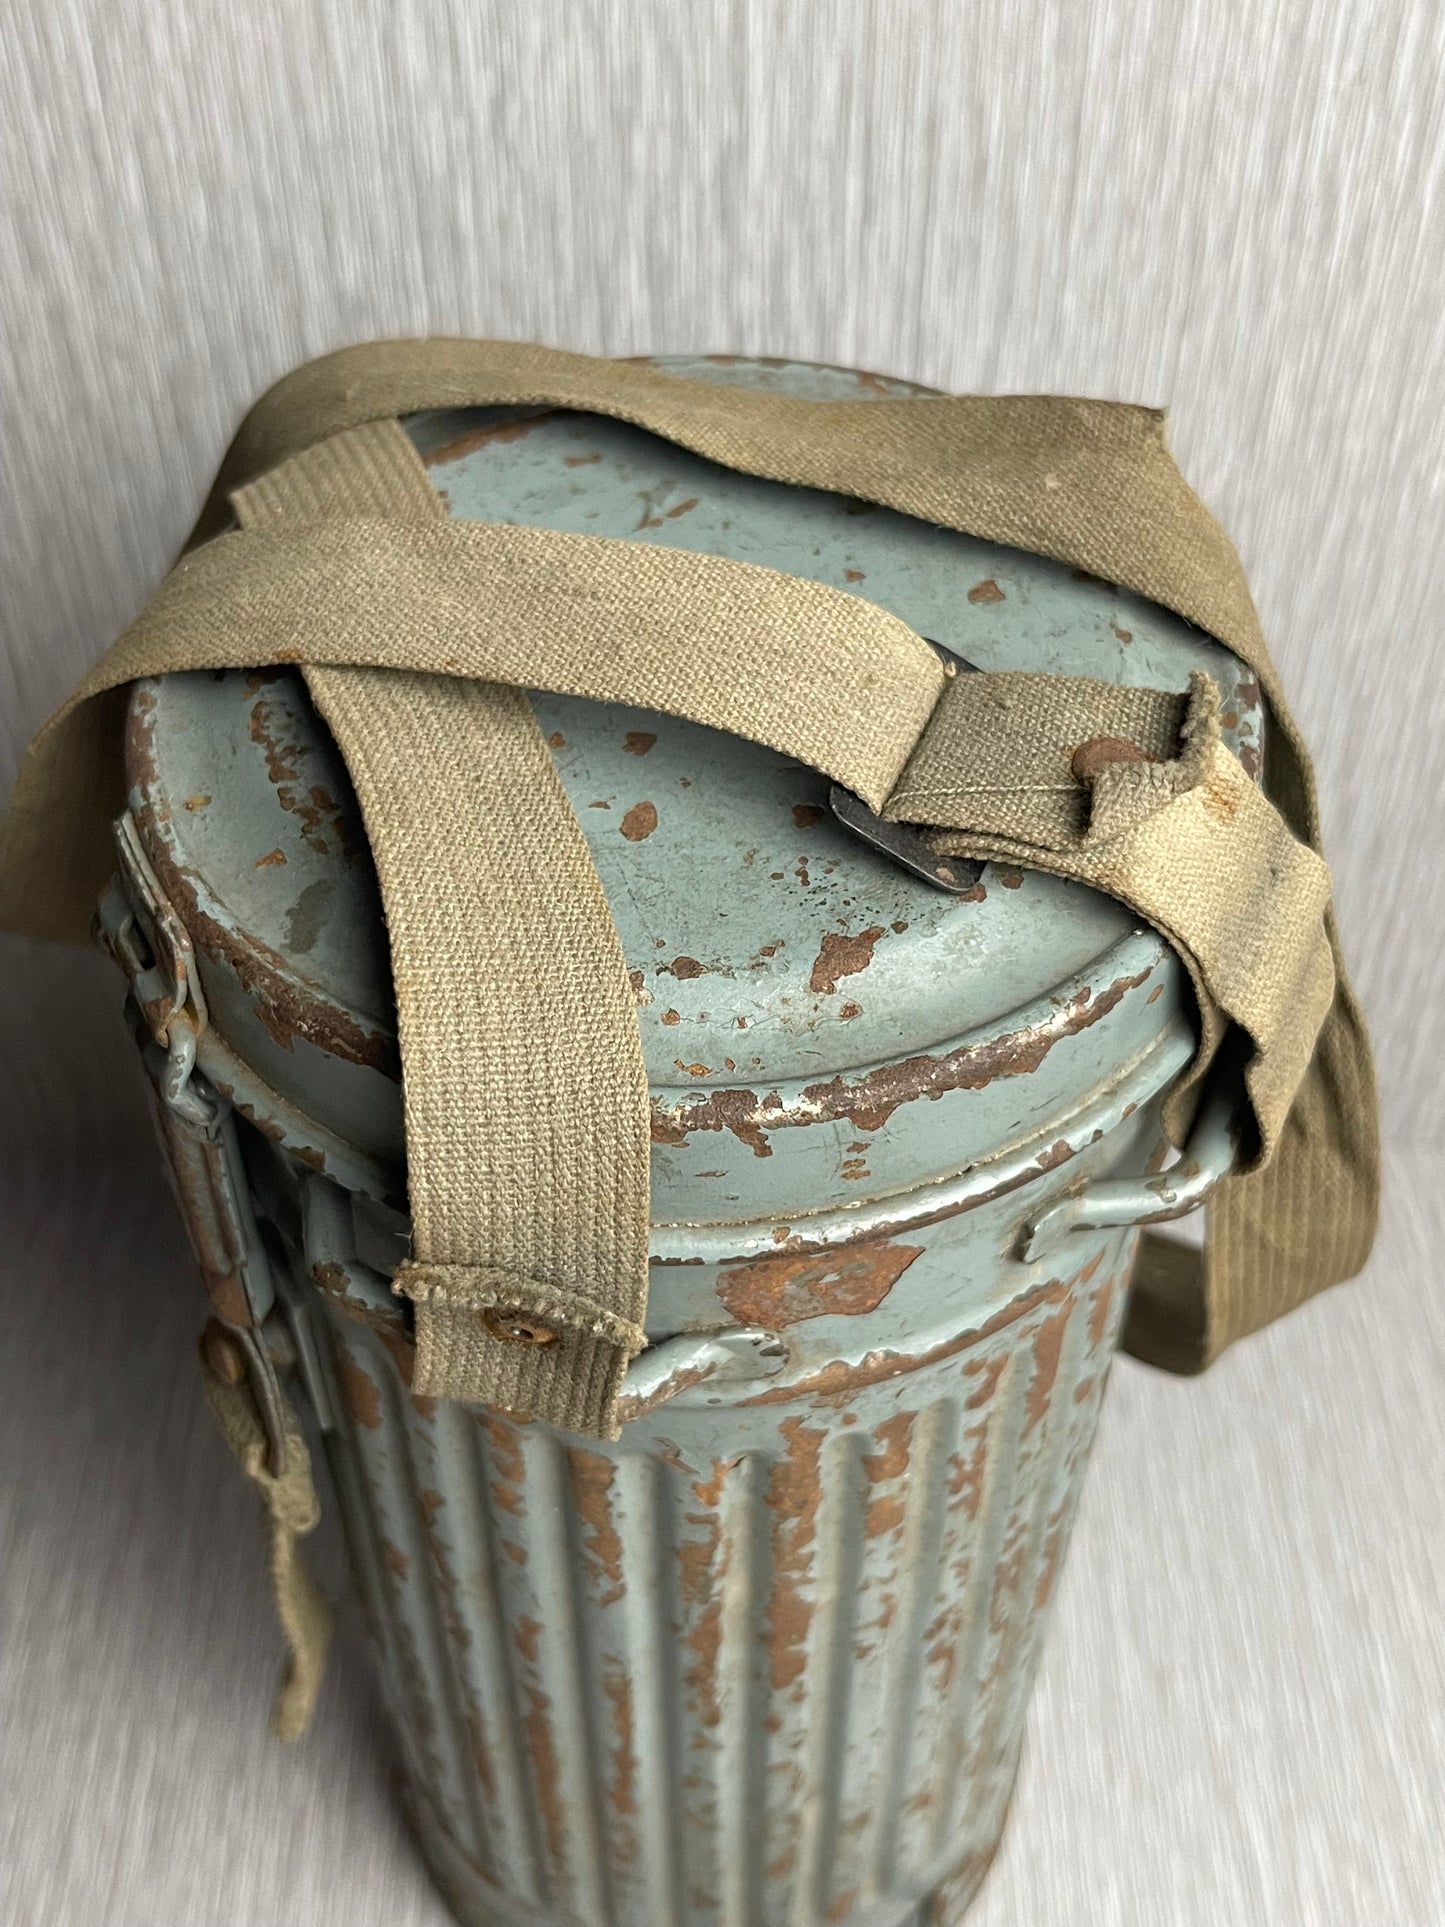 GERMAN WW2 1944 KRIEGSMARINE CAMOUFLAGED GAS MASK CANISTER W/ RIVETED STRAPS